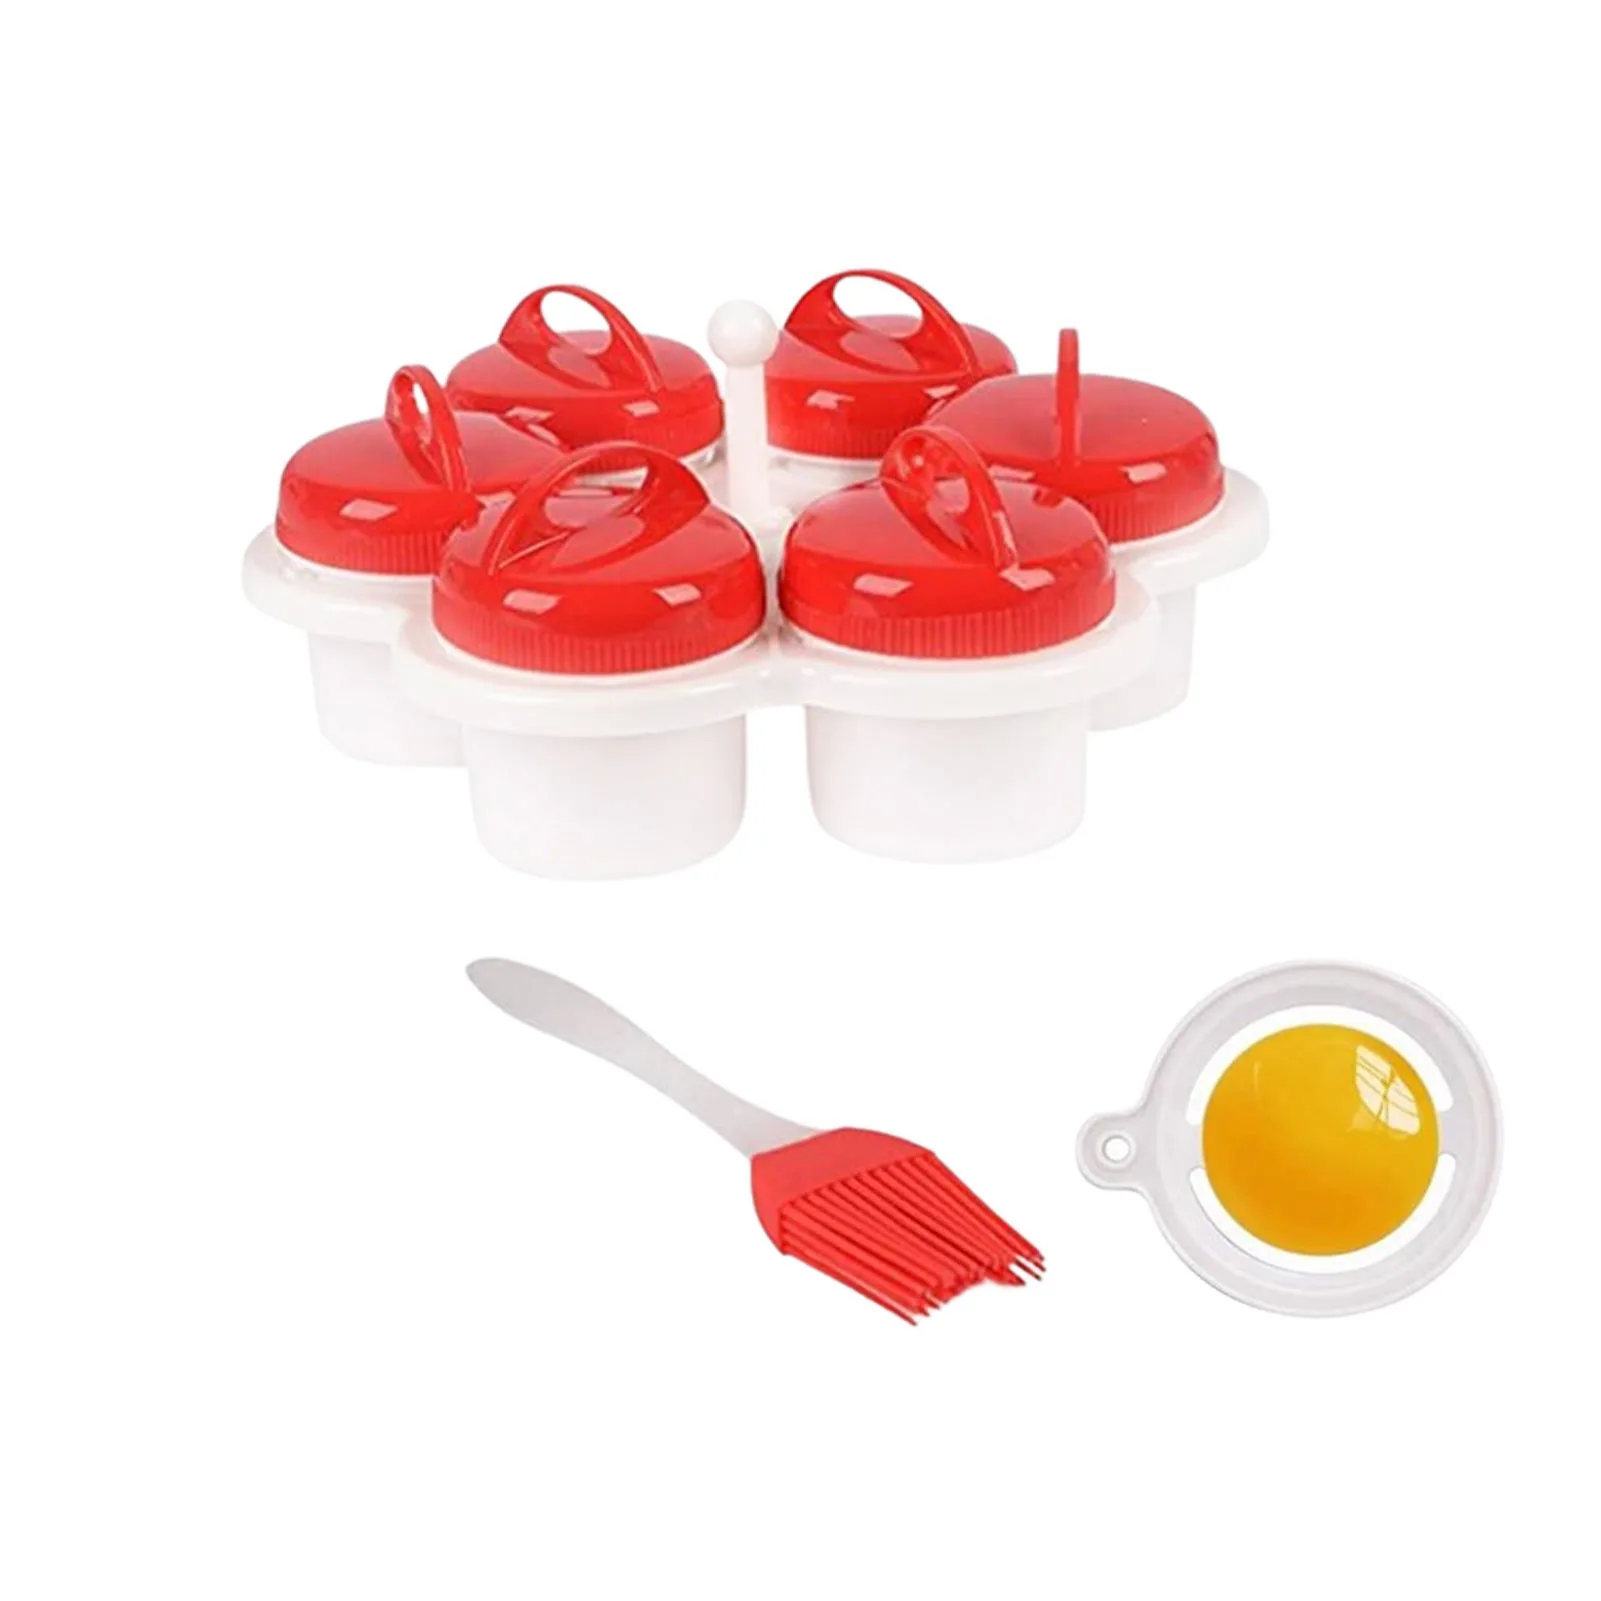 

6PCS/Set Egg Poachers Cooker Silicone Non-Stick Egg Boiler Cookers Pack Boiled Eggs Mold Cups Steamer Kitchen Gadgets